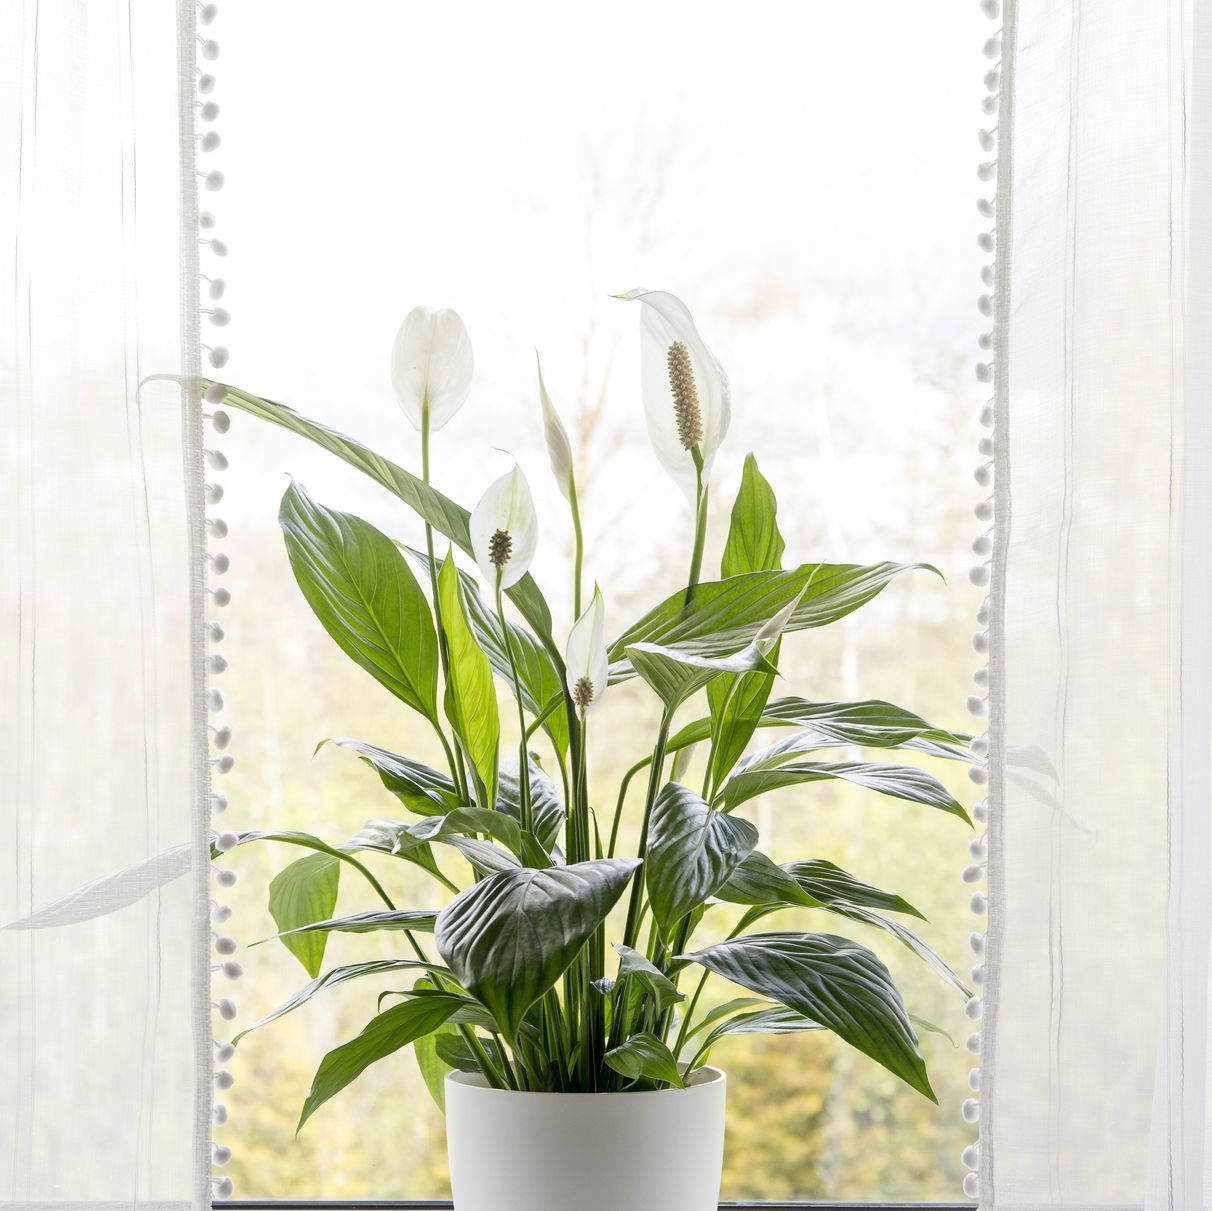 peace lily in water vase